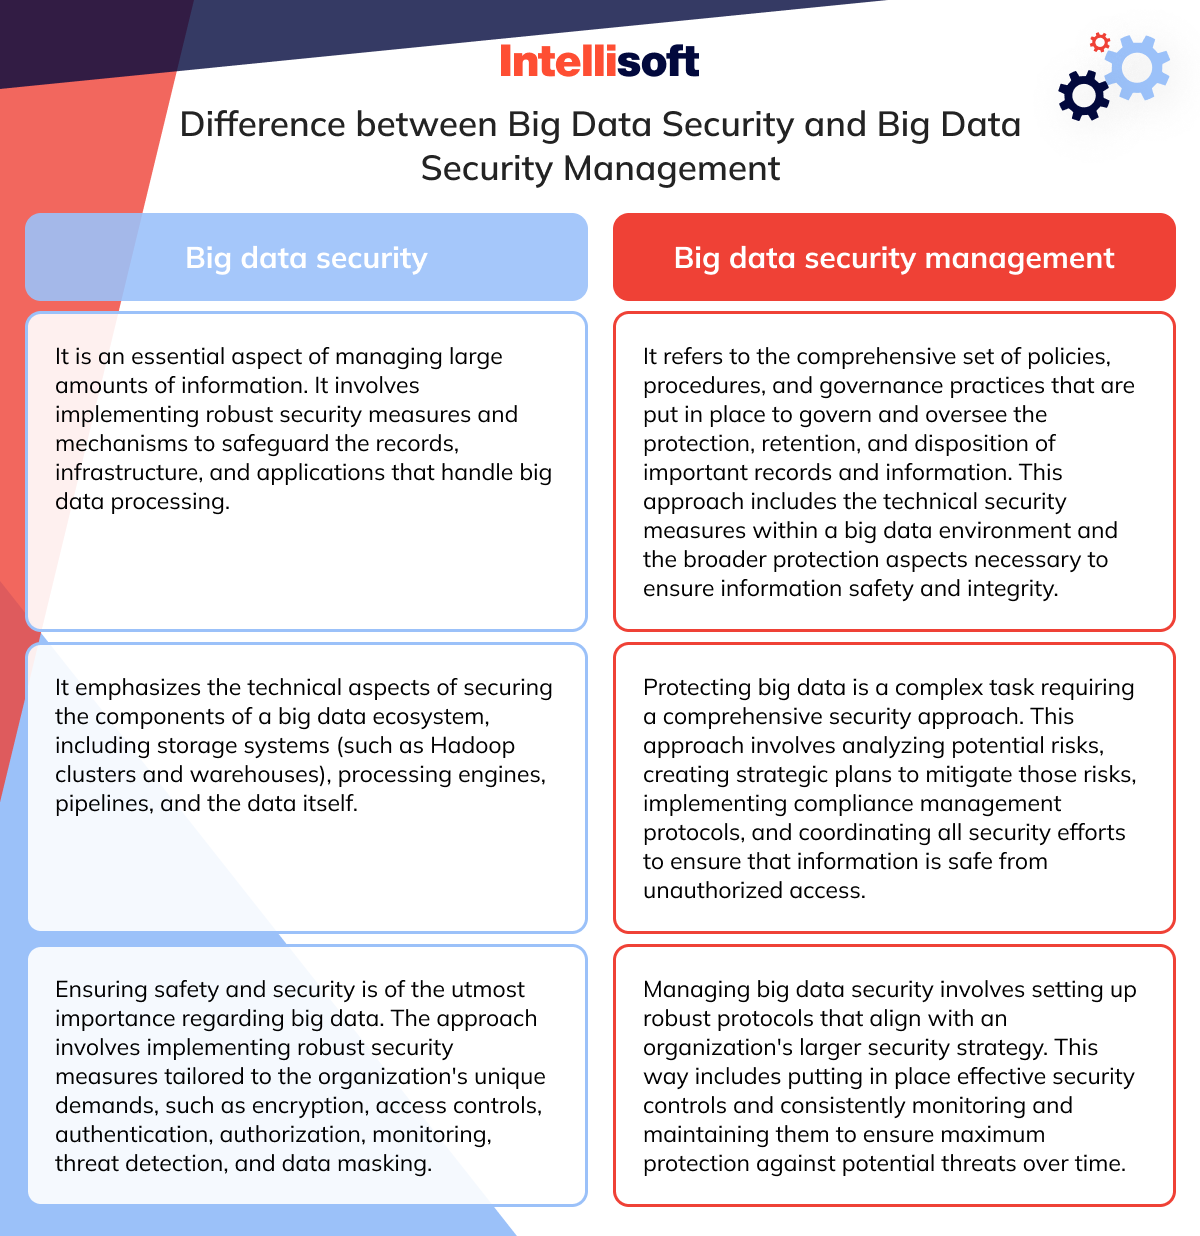 Difference between Big Data Security and Big Data Security Management